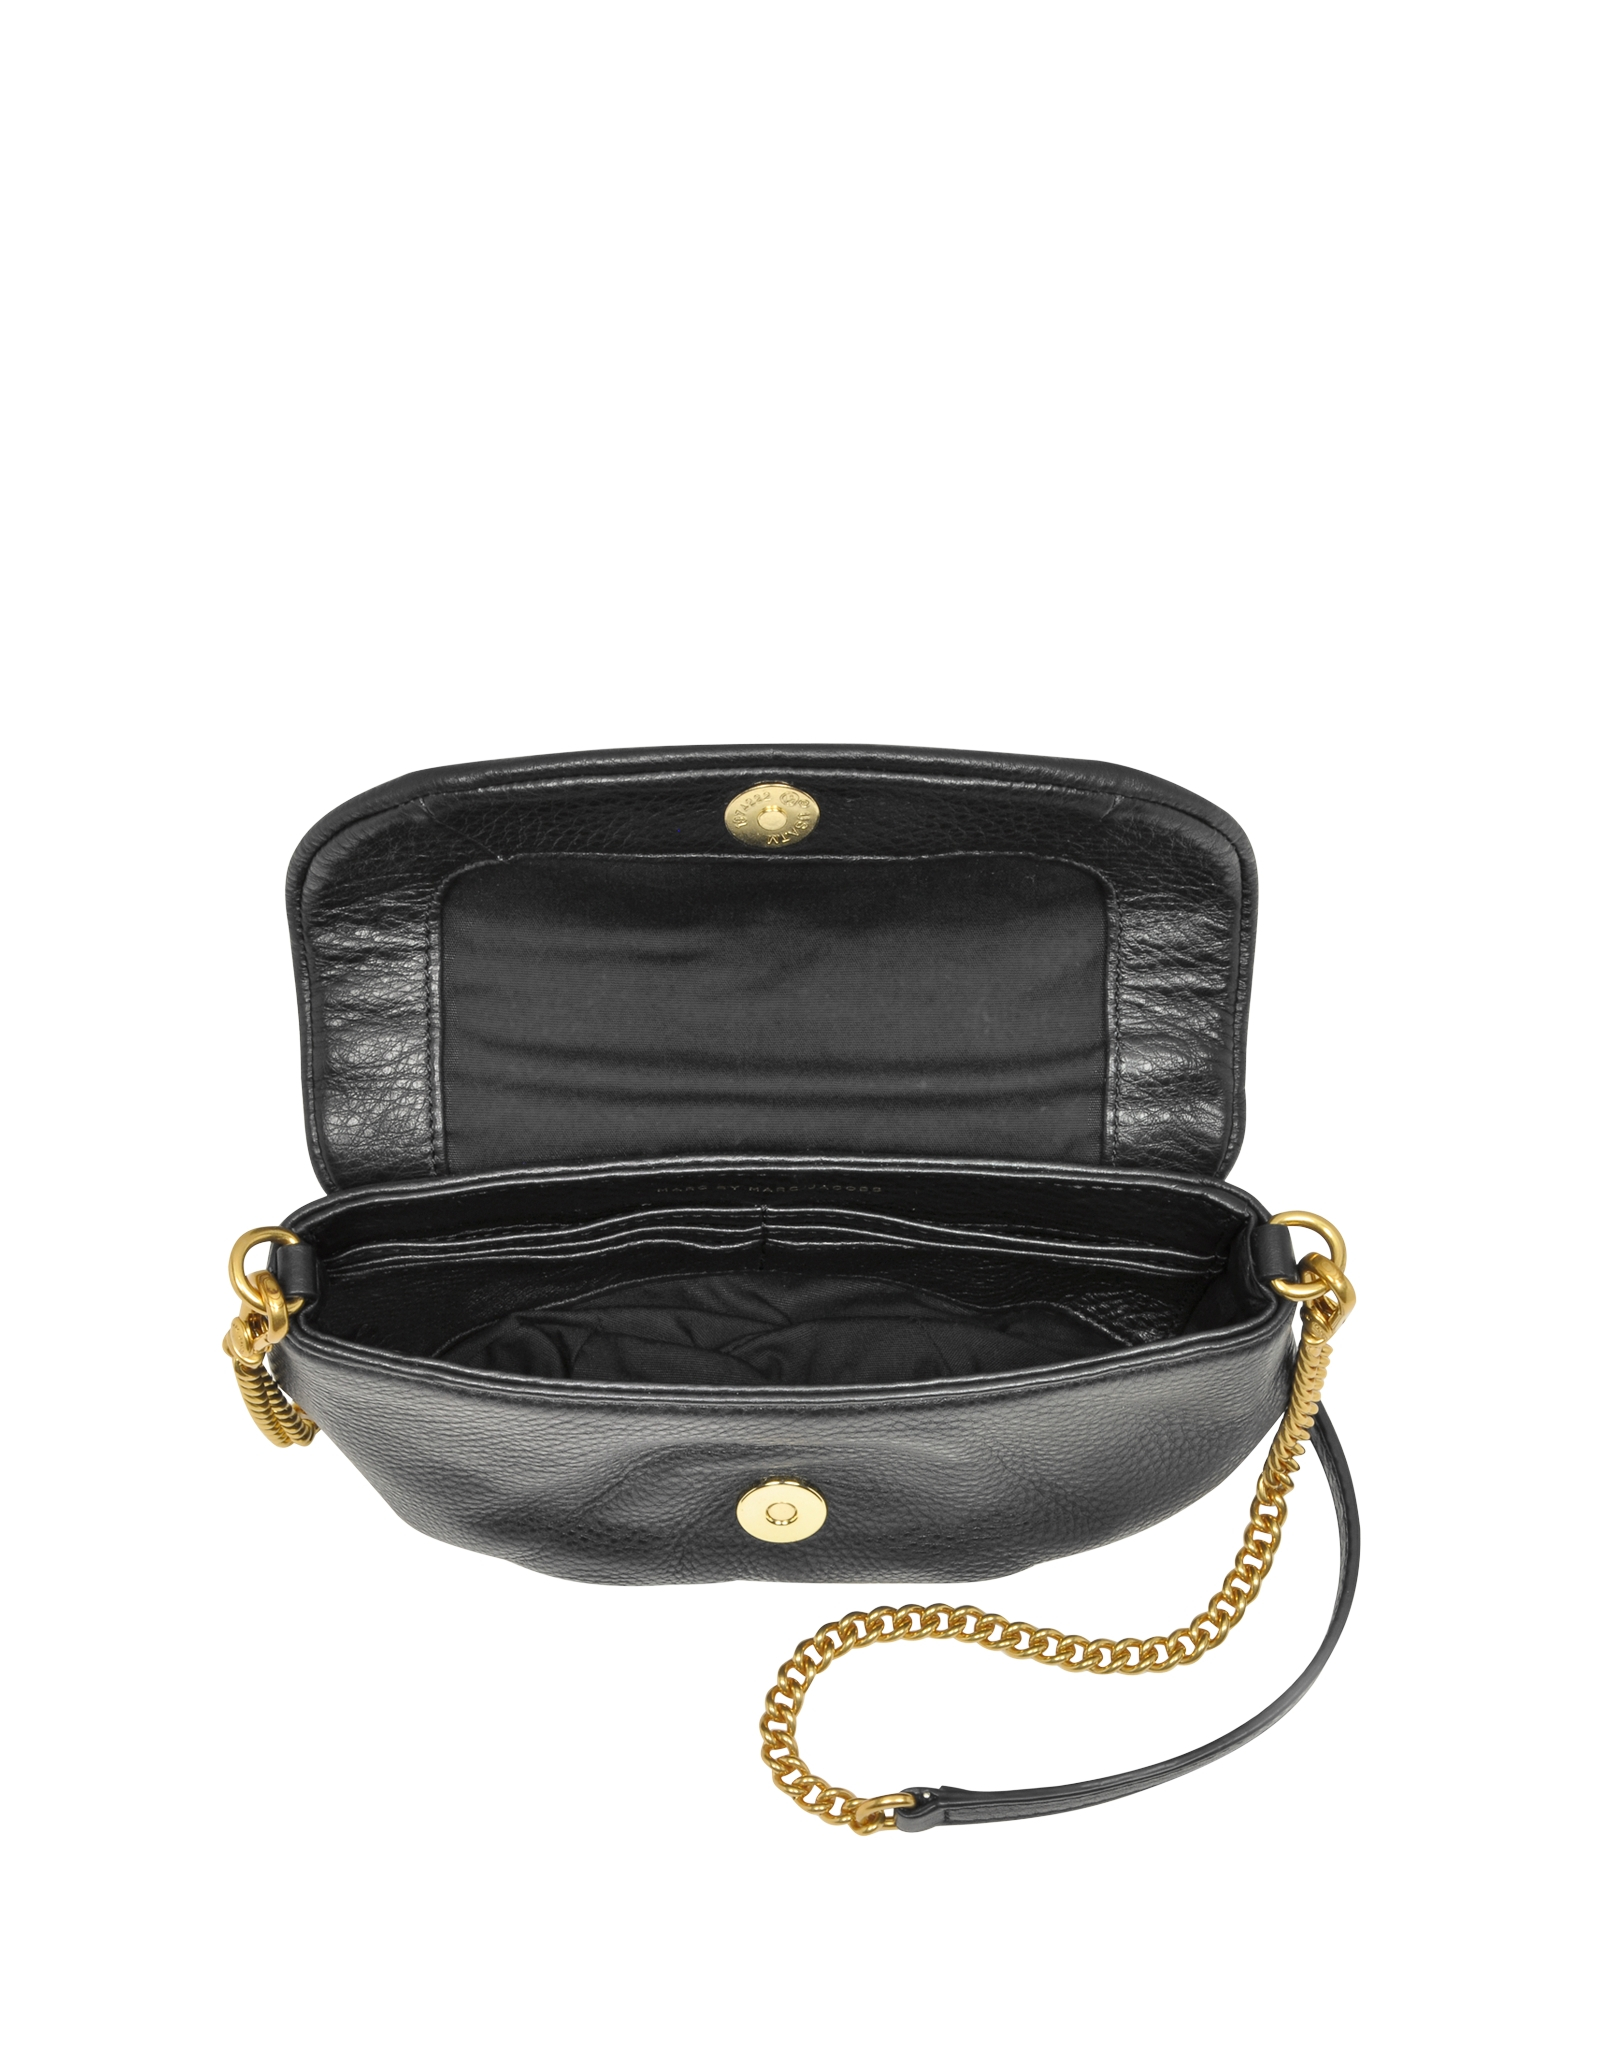 Lyst - Marc By Marc Jacobs New Q Karlie Black Leather Crossbody Bag in Black